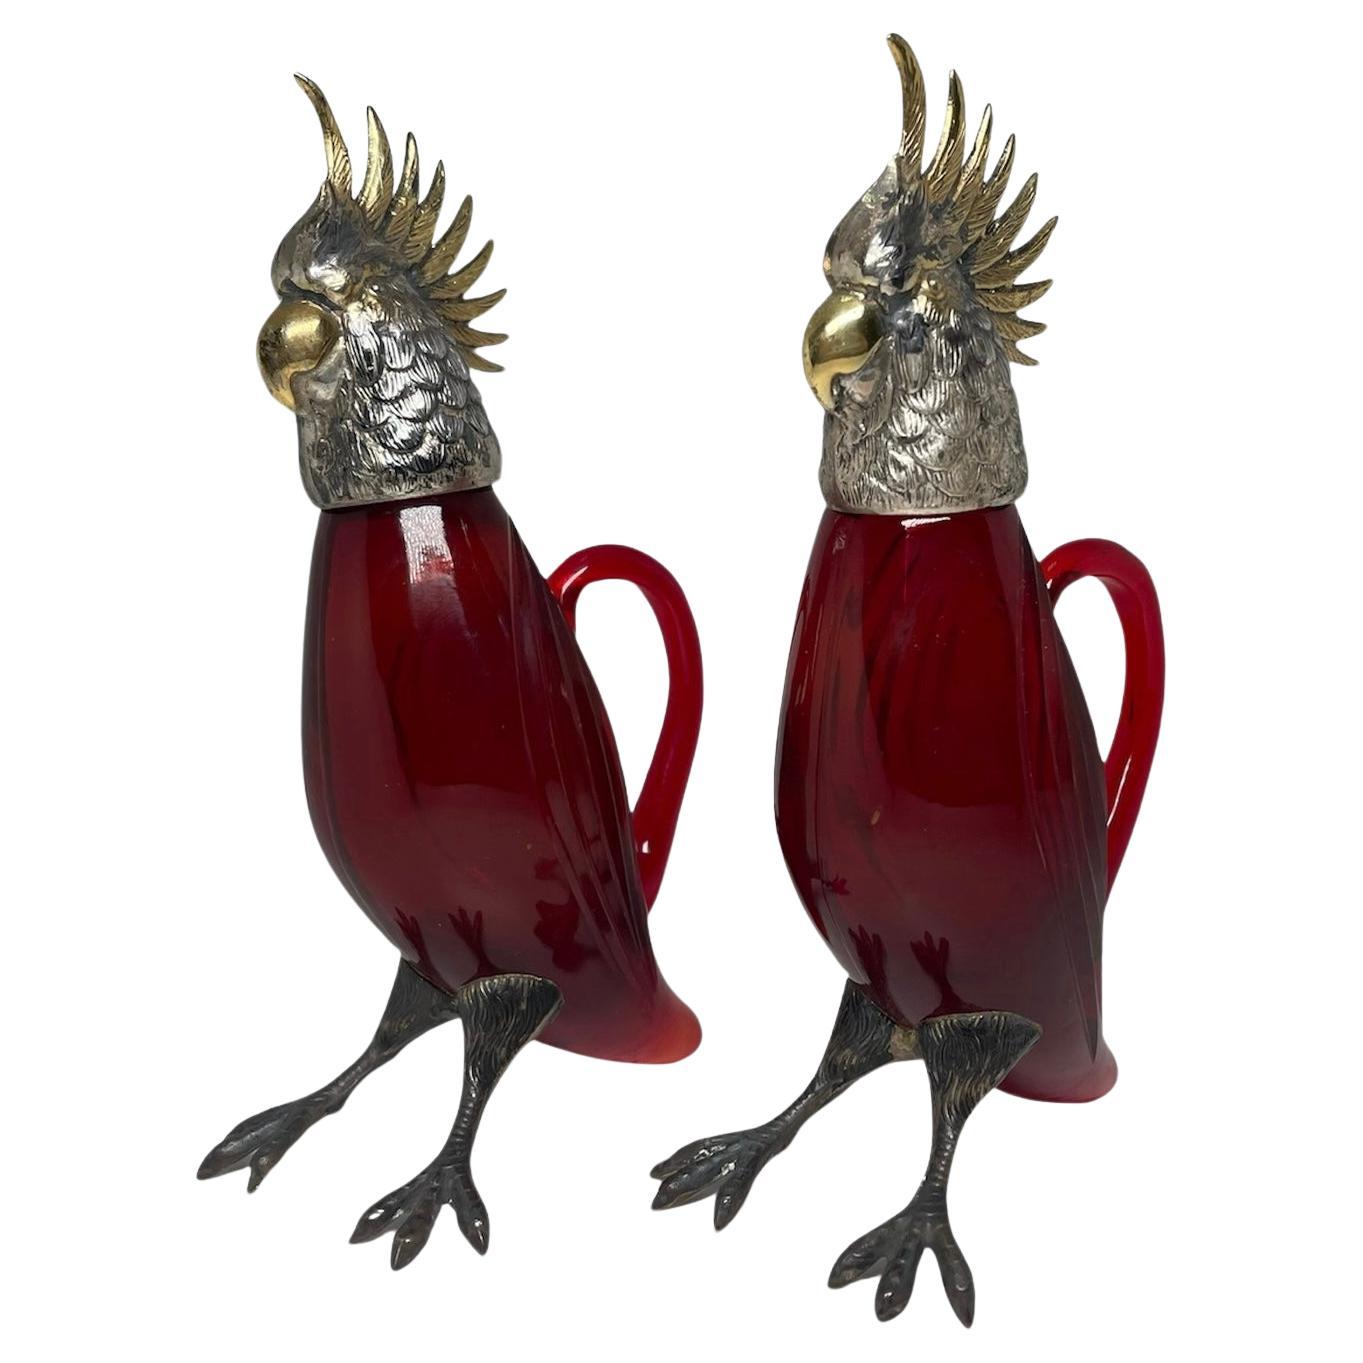 This is a Pair of Sterling Silver And Glass Cockatiel Cruet for storage of oil and vinegar. It depicts a pair of Cockatiel sculptures in which  their bodies are made of ruby red glass and their heads and feet are made of sterling silver. Their